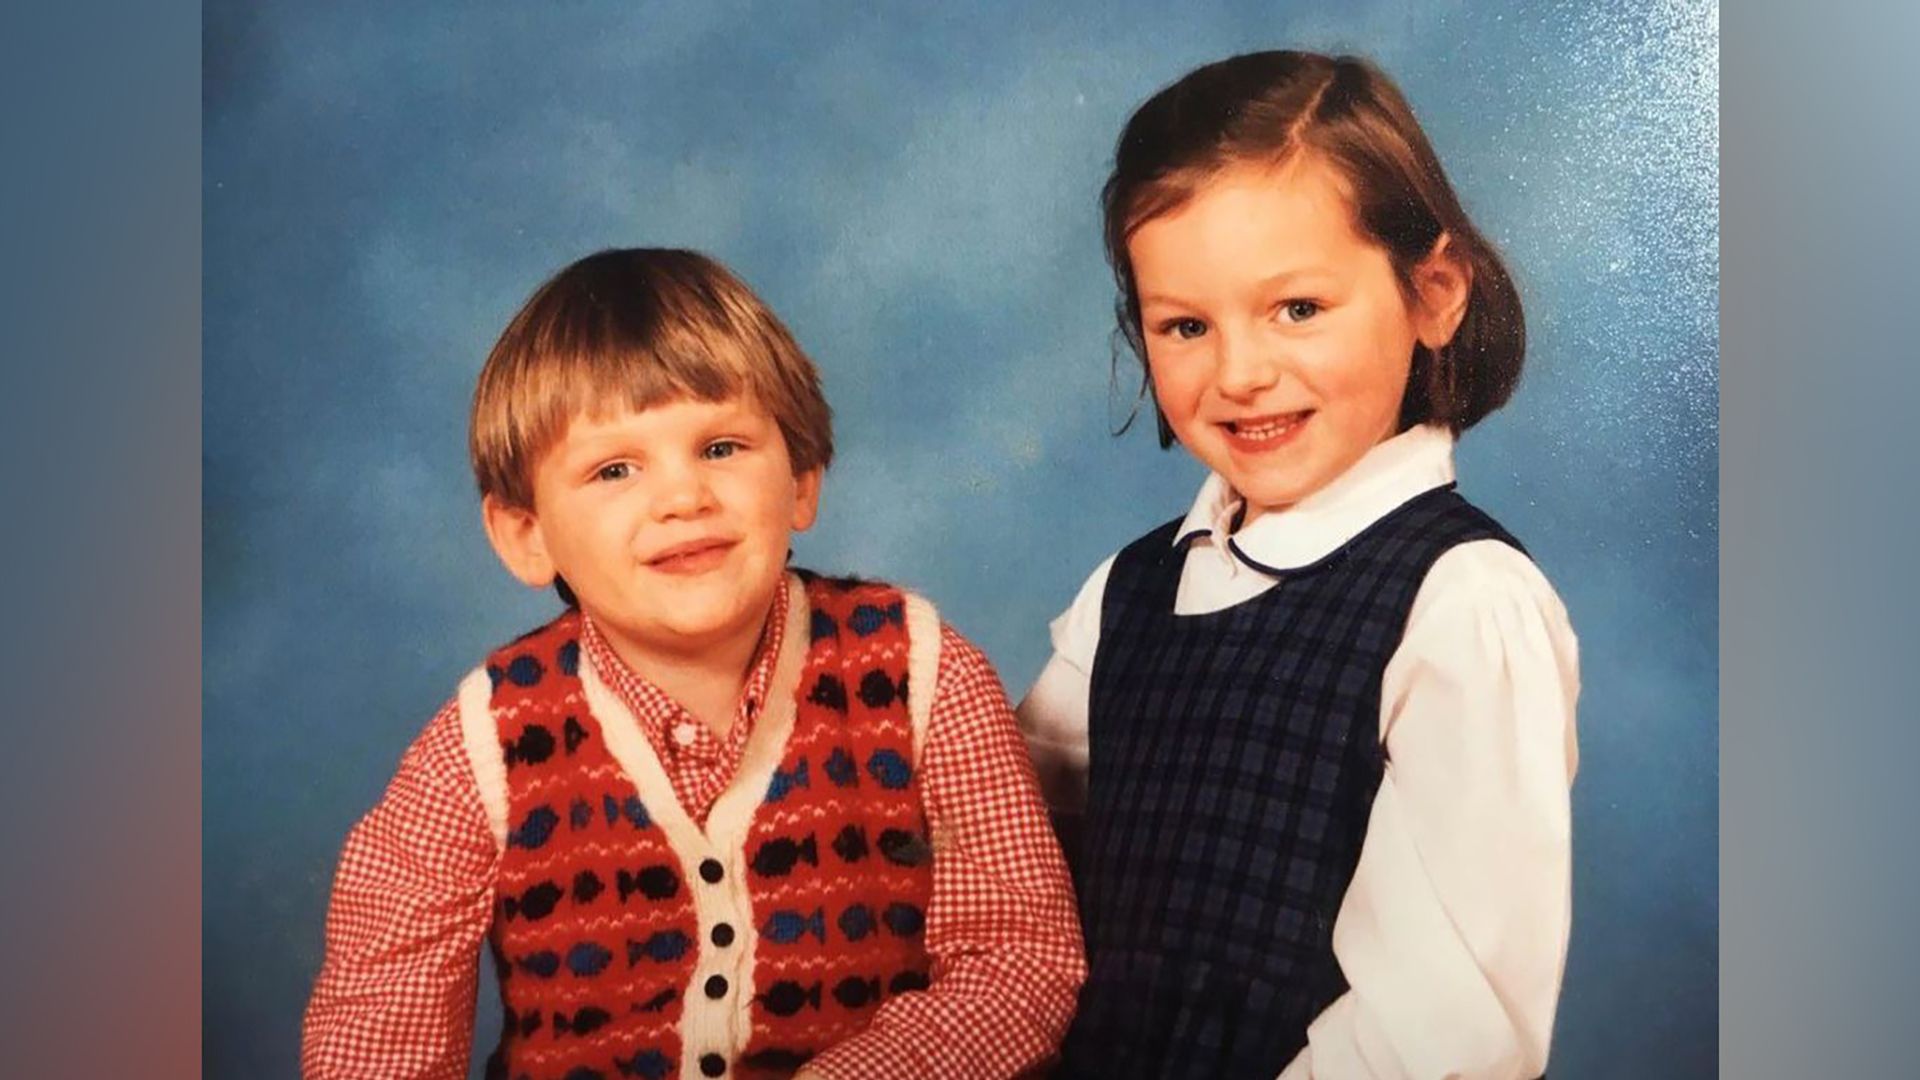 Emma Corrin with her younger brother as a child